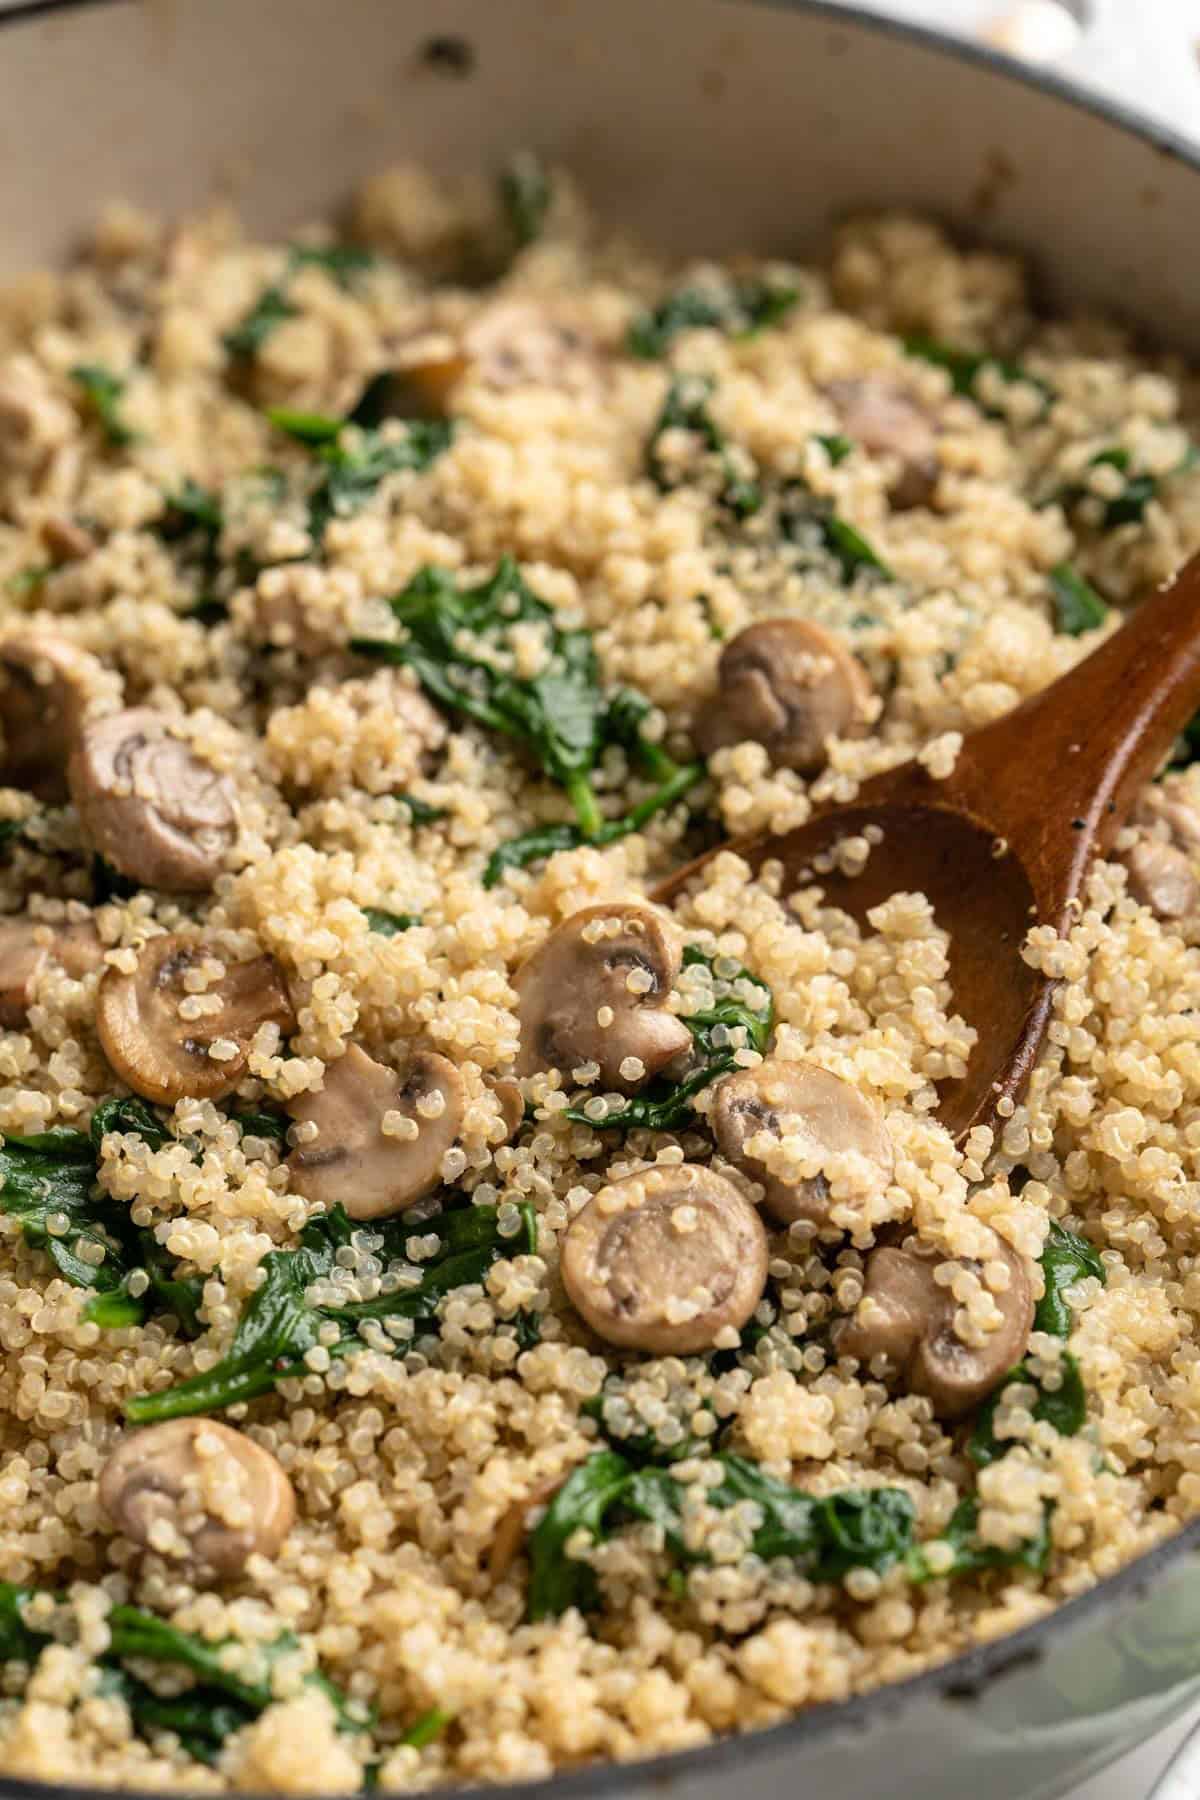 Skillet of coconut creamy spinach and mushroom quinoa with wooden spoon